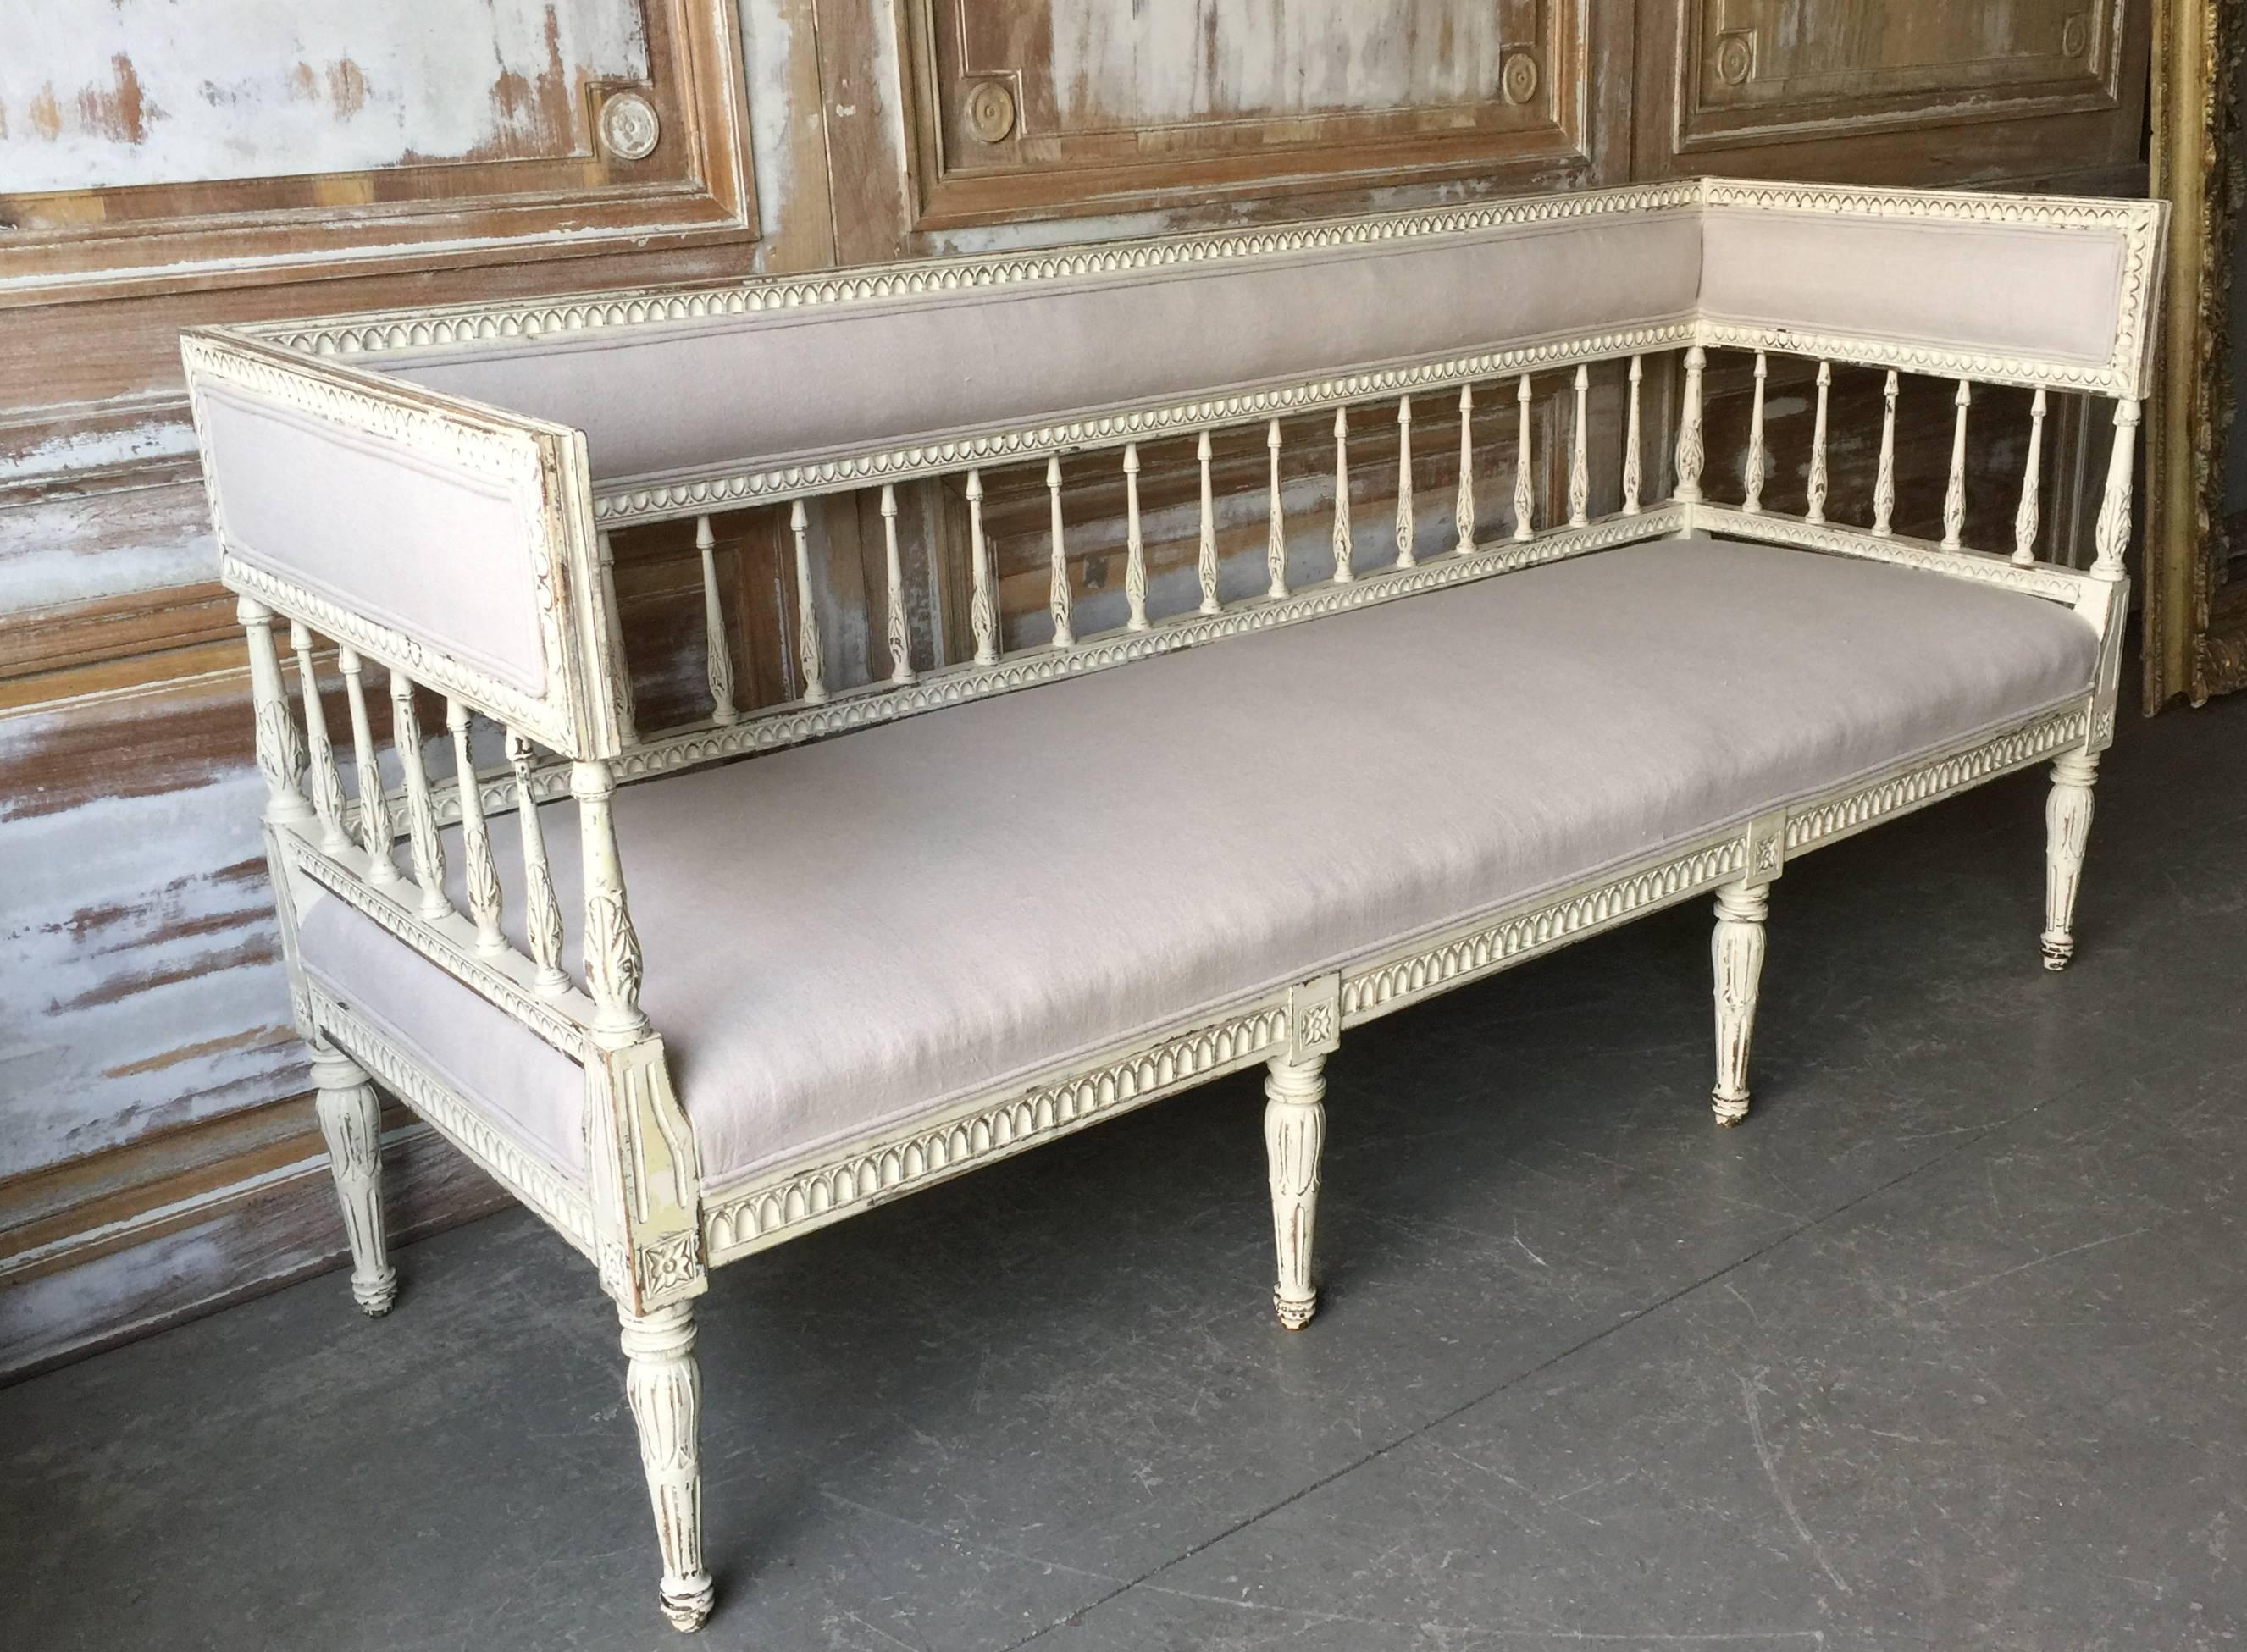 Late 19th century Swedish Gustavian Style sofa with richly carved balustered back and sides and beautifully carved feet with lotus blossoms beneath flower motifs. Reupholstered in very pale gray linen.
Sweden, late 19th century.